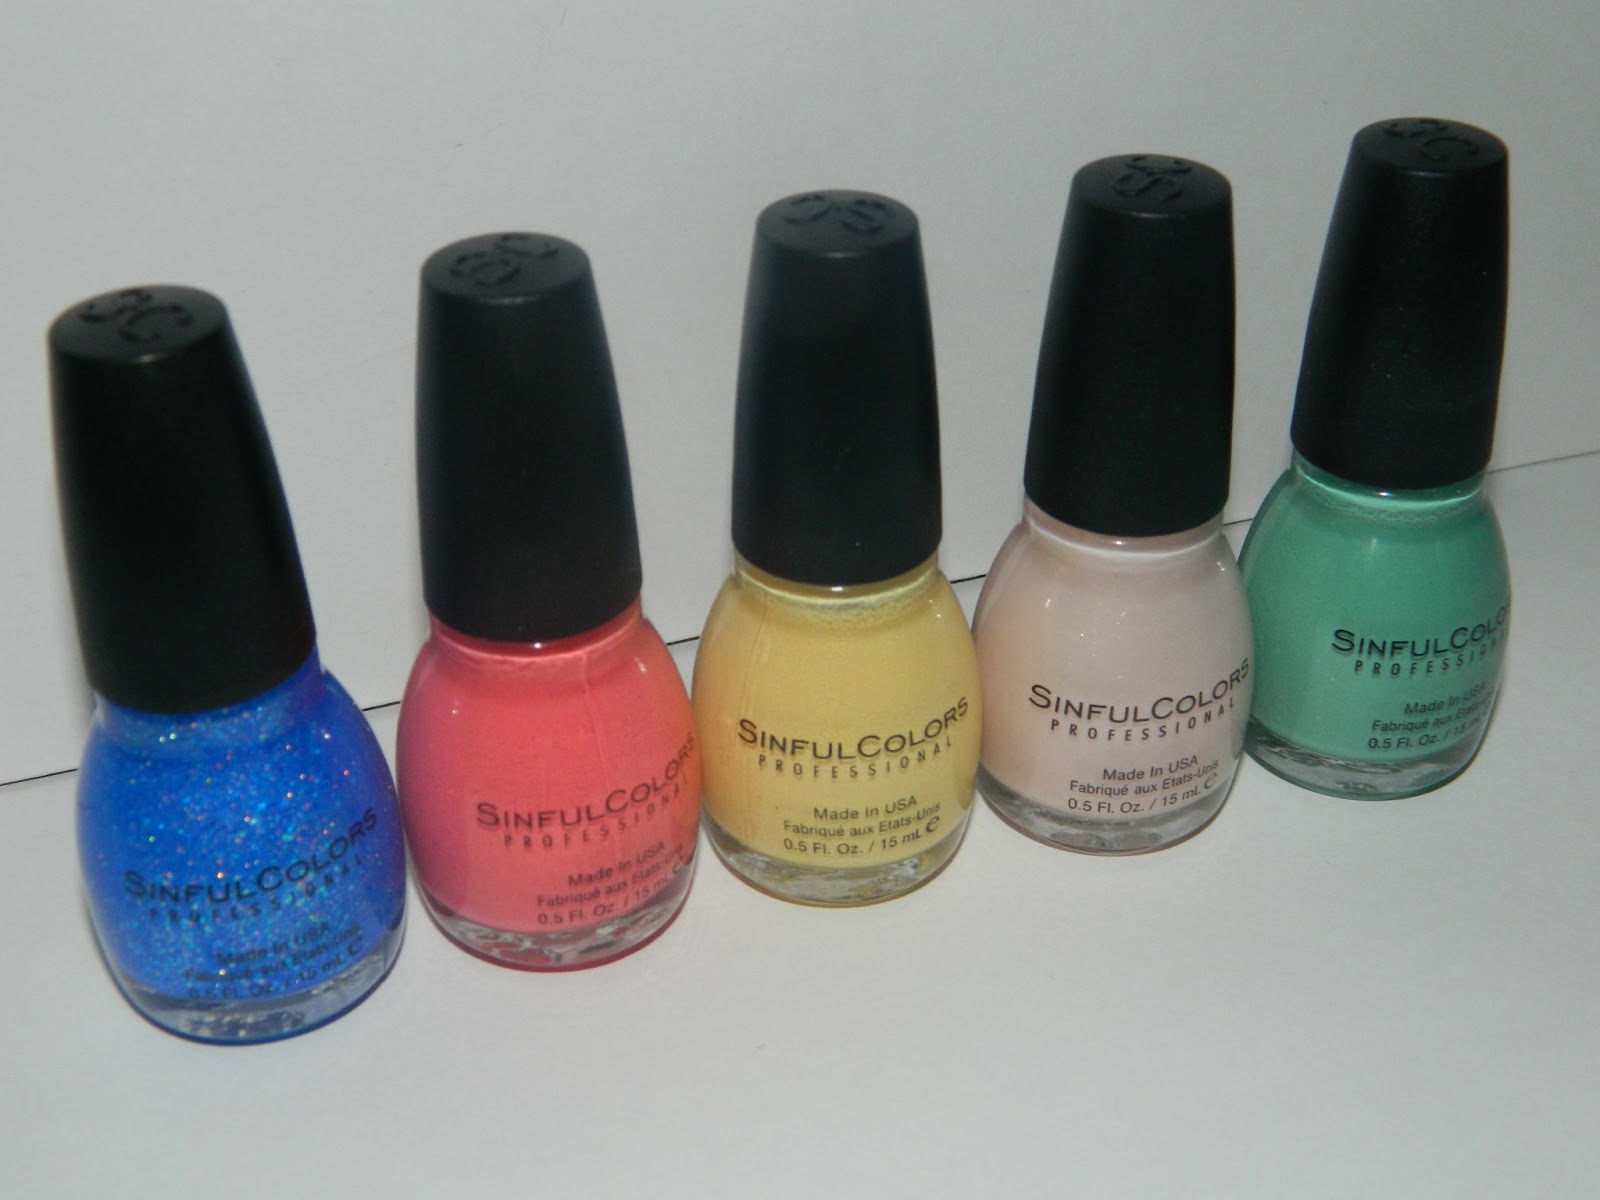 3. Sinful Colors Professional Nail Polish - Pastels - wide 3